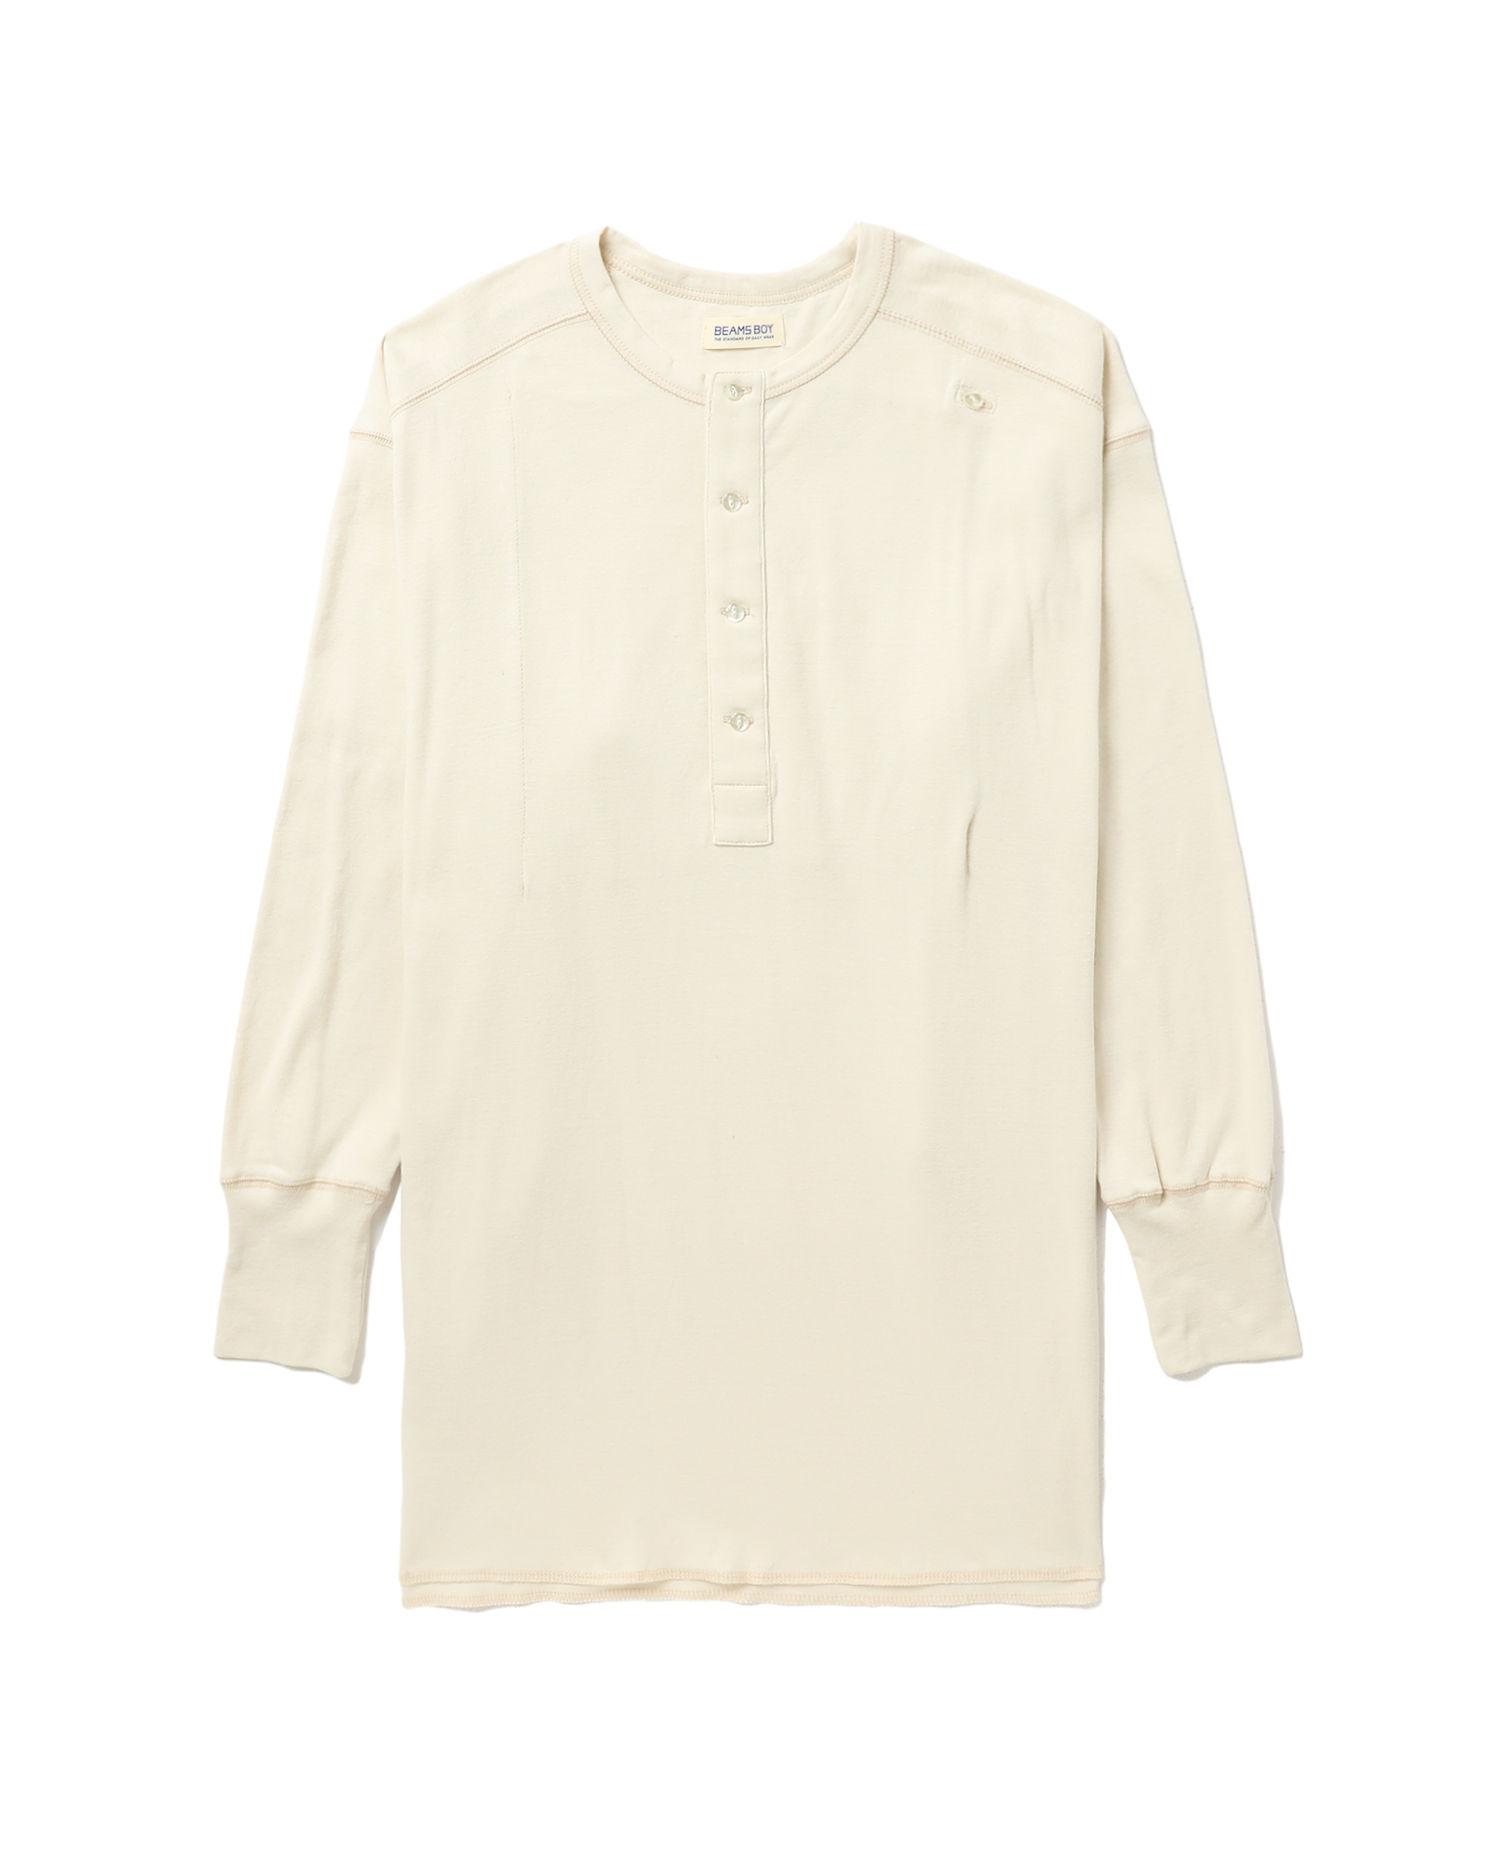 Buttoned tee by BEAMS BOY